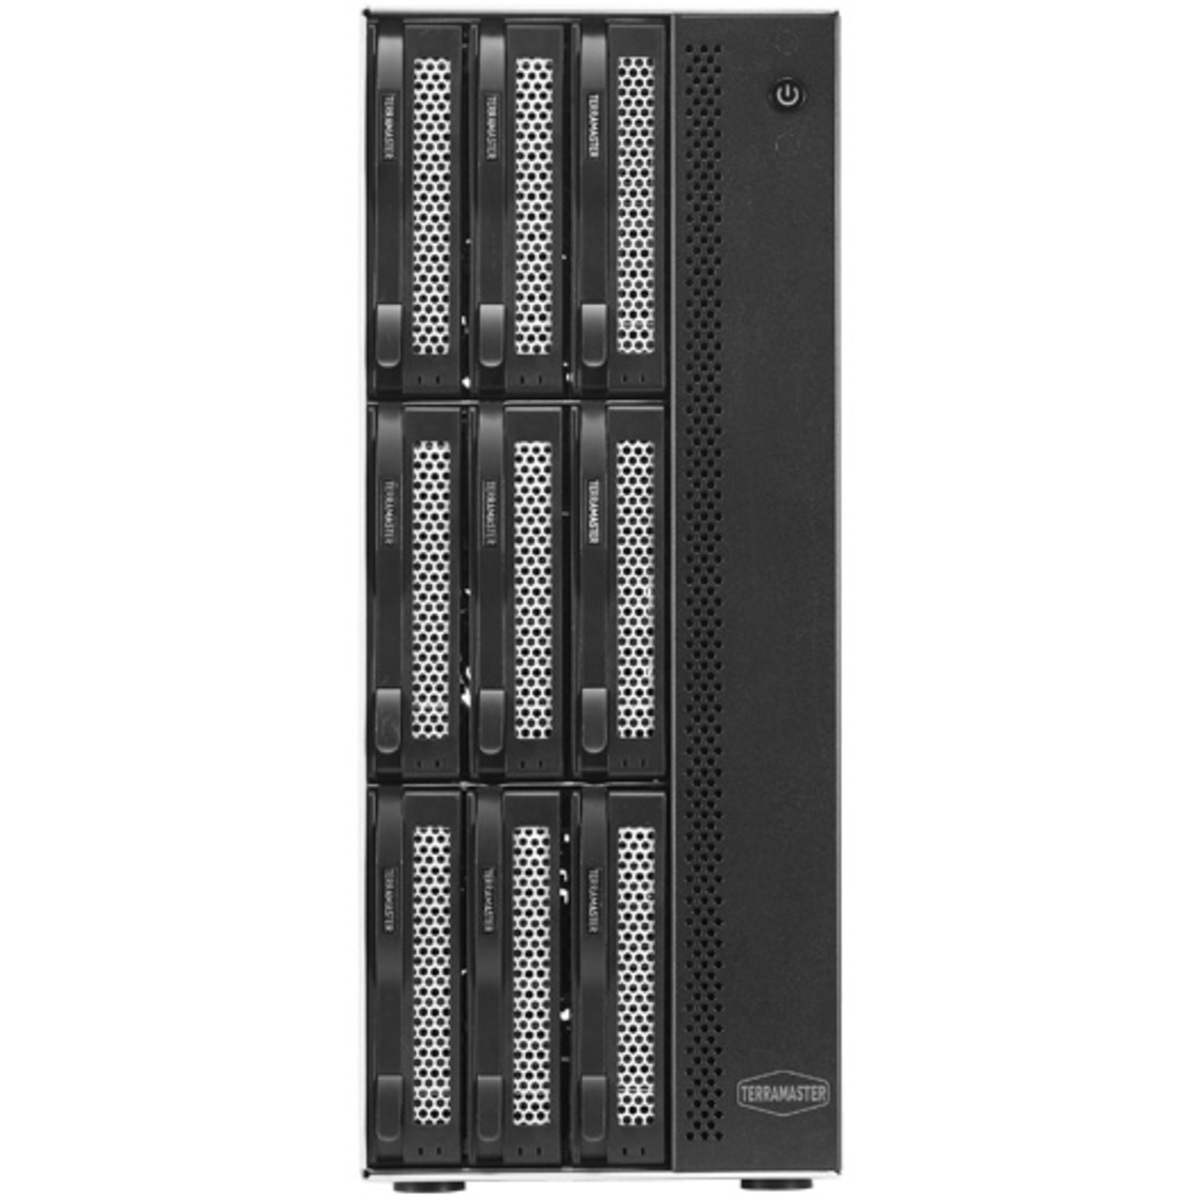 TerraMaster T9-423 60tb 9-Bay Desktop Multimedia / Power User / Business NAS - Network Attached Storage Device 5x12tb Toshiba Enterprise Capacity MG07ACA12TE 3.5 7200rpm SATA 6Gb/s HDD ENTERPRISE Class Drives Installed - Burn-In Tested T9-423